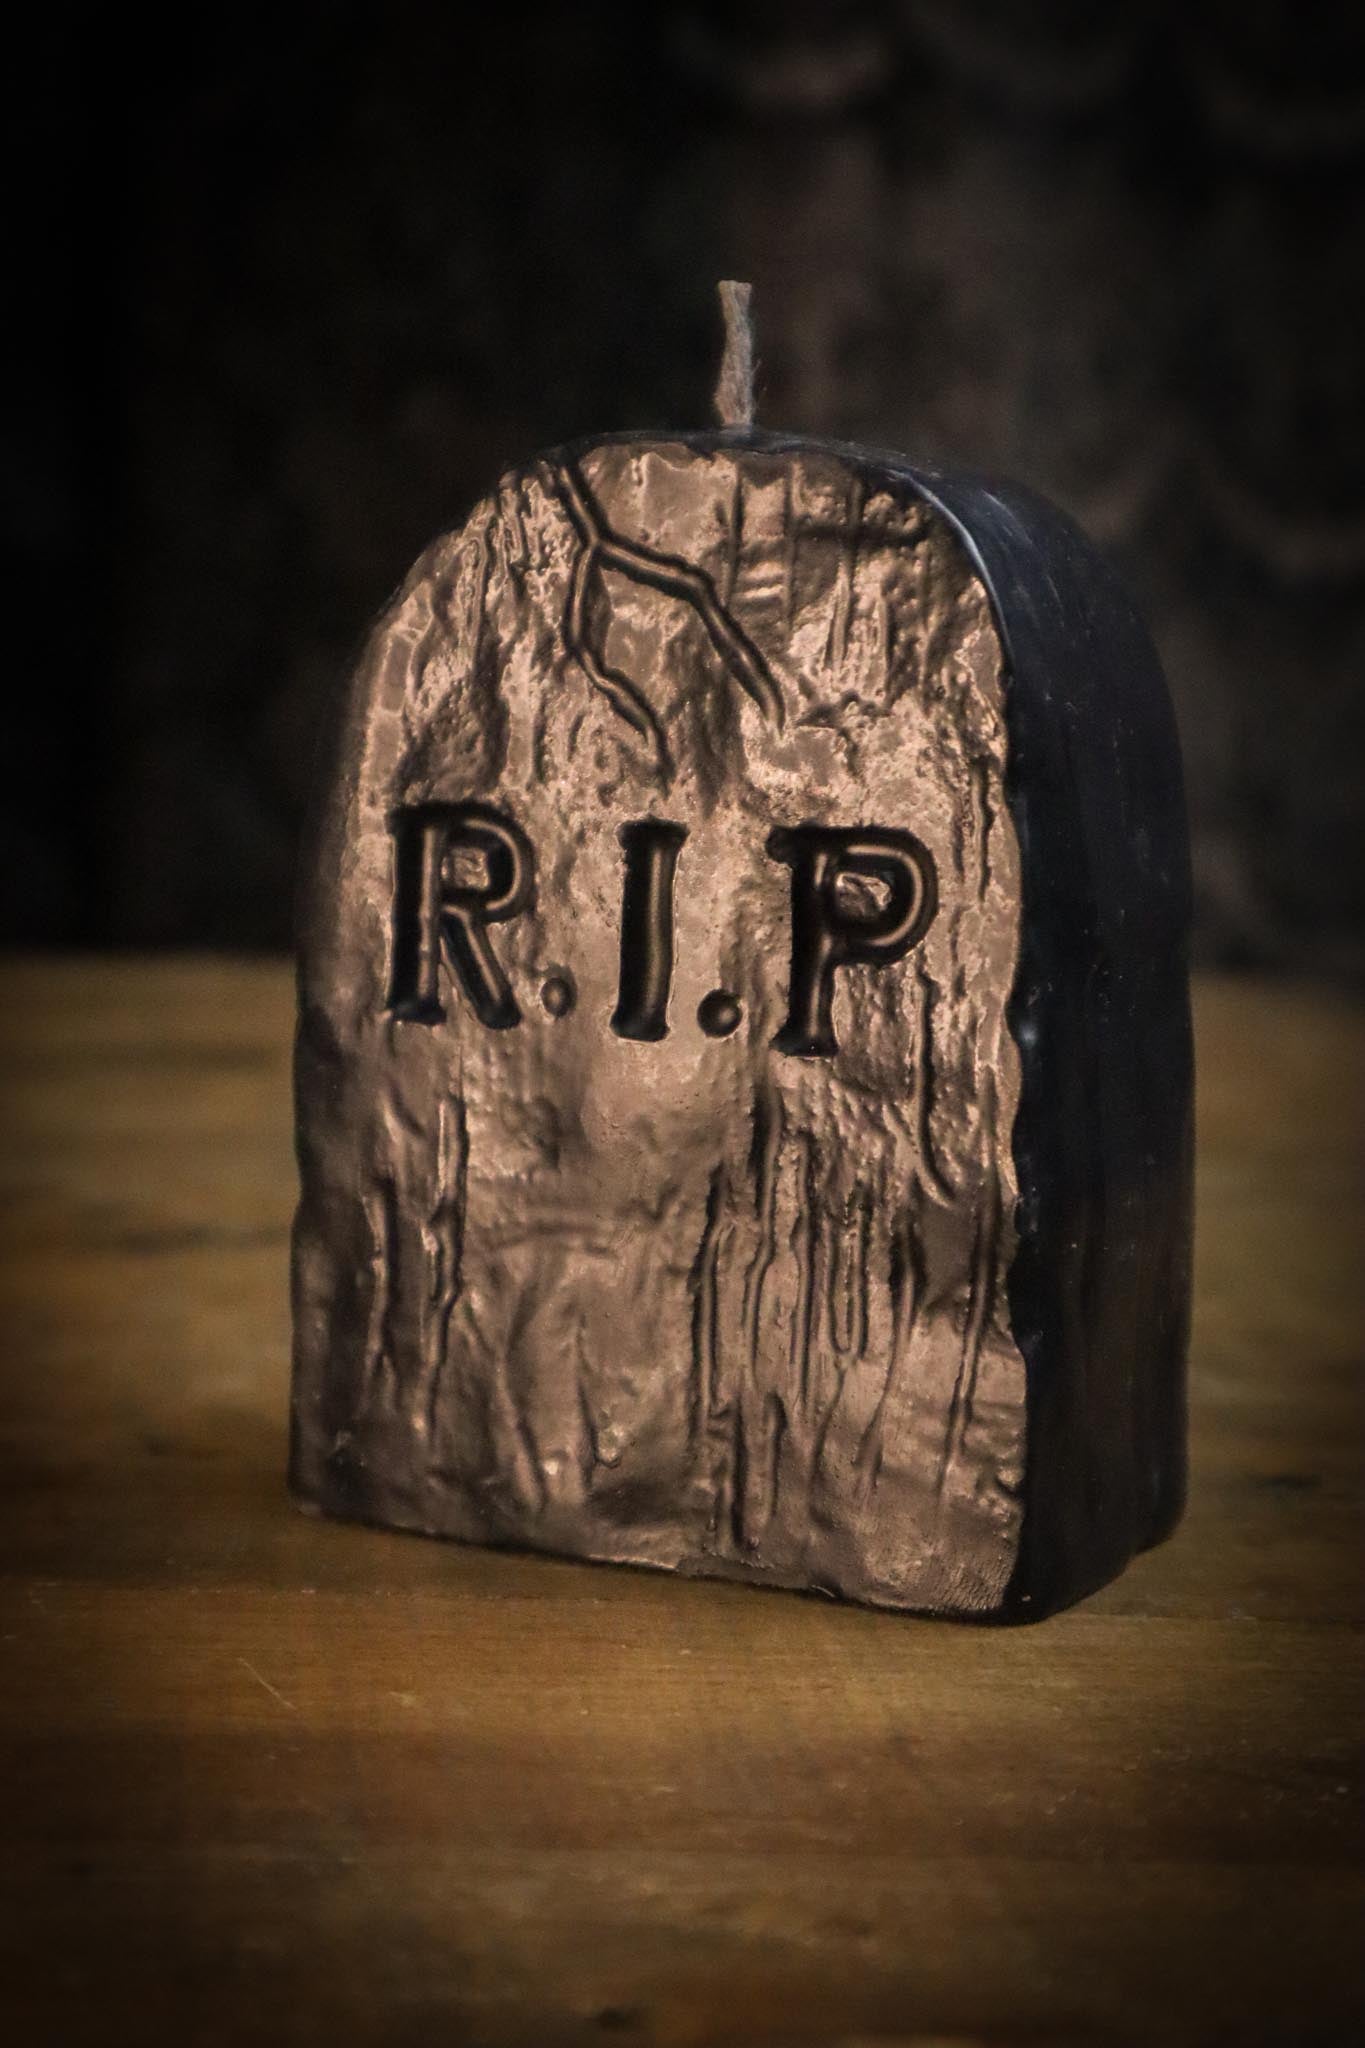 R.I.P. Tombstone Candle